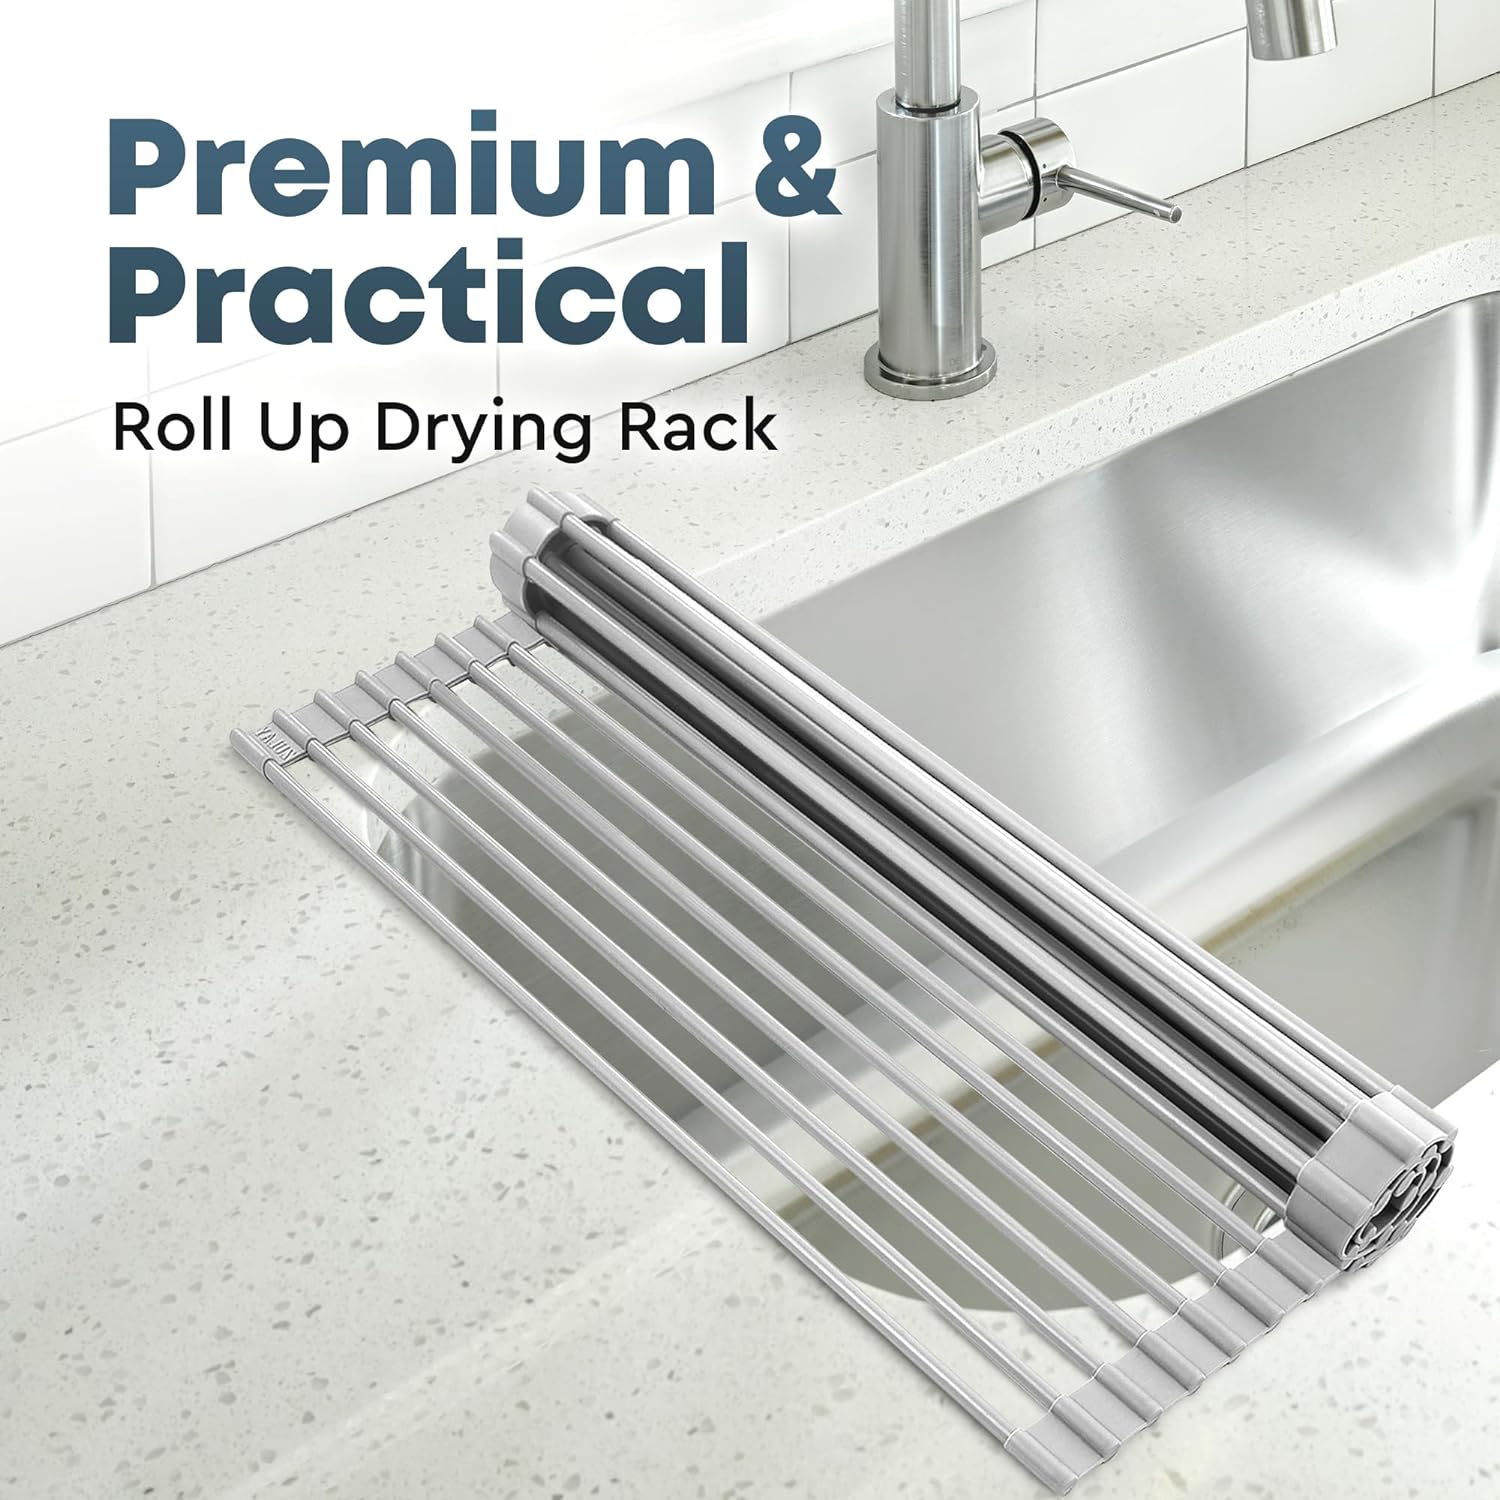 Roll-up Dish Drying Rack, Over-sink Dish Rack, Collapsible Multi